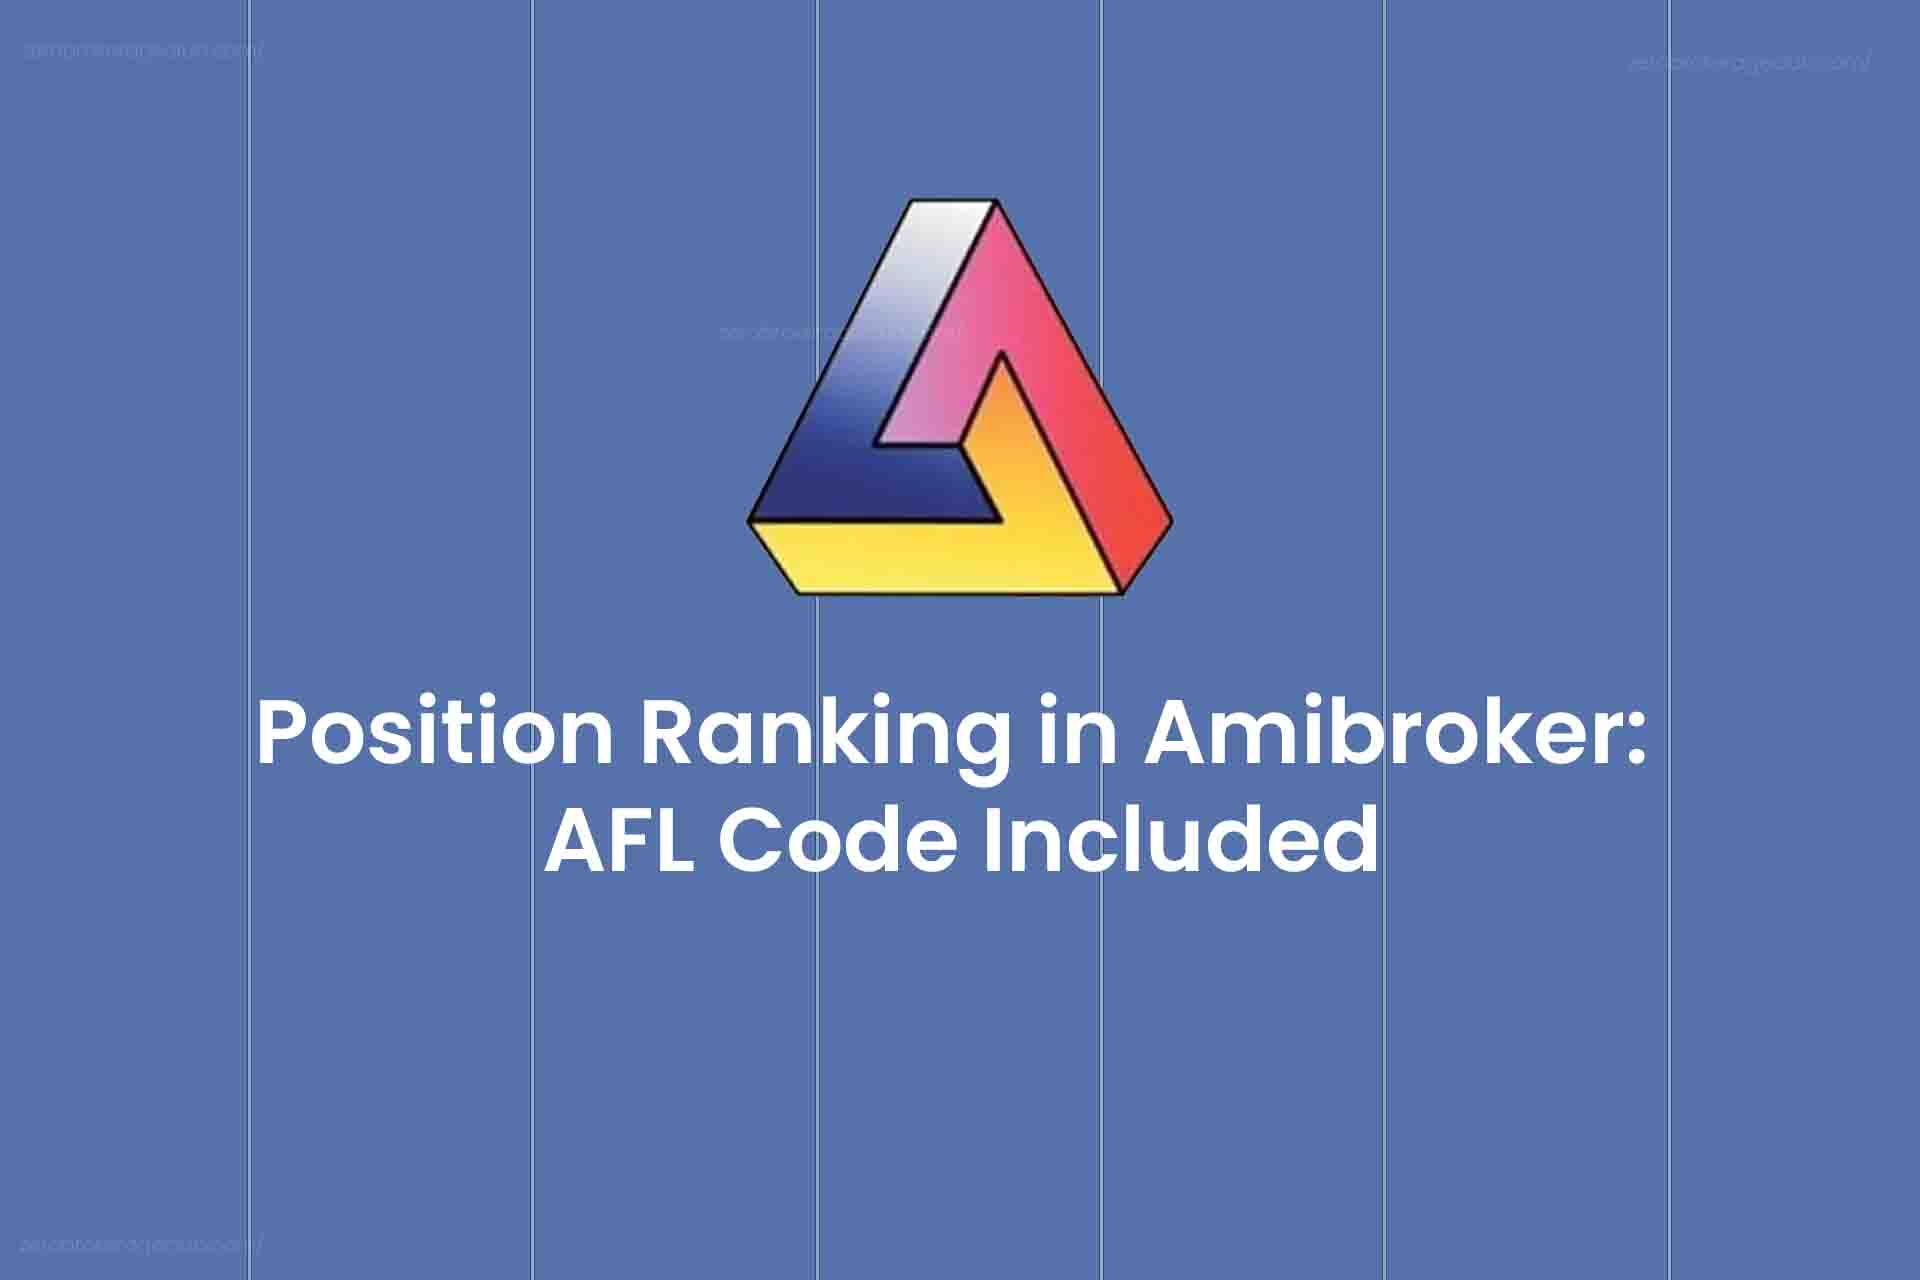 Position Ranking in Amibroker: AFL Code Included